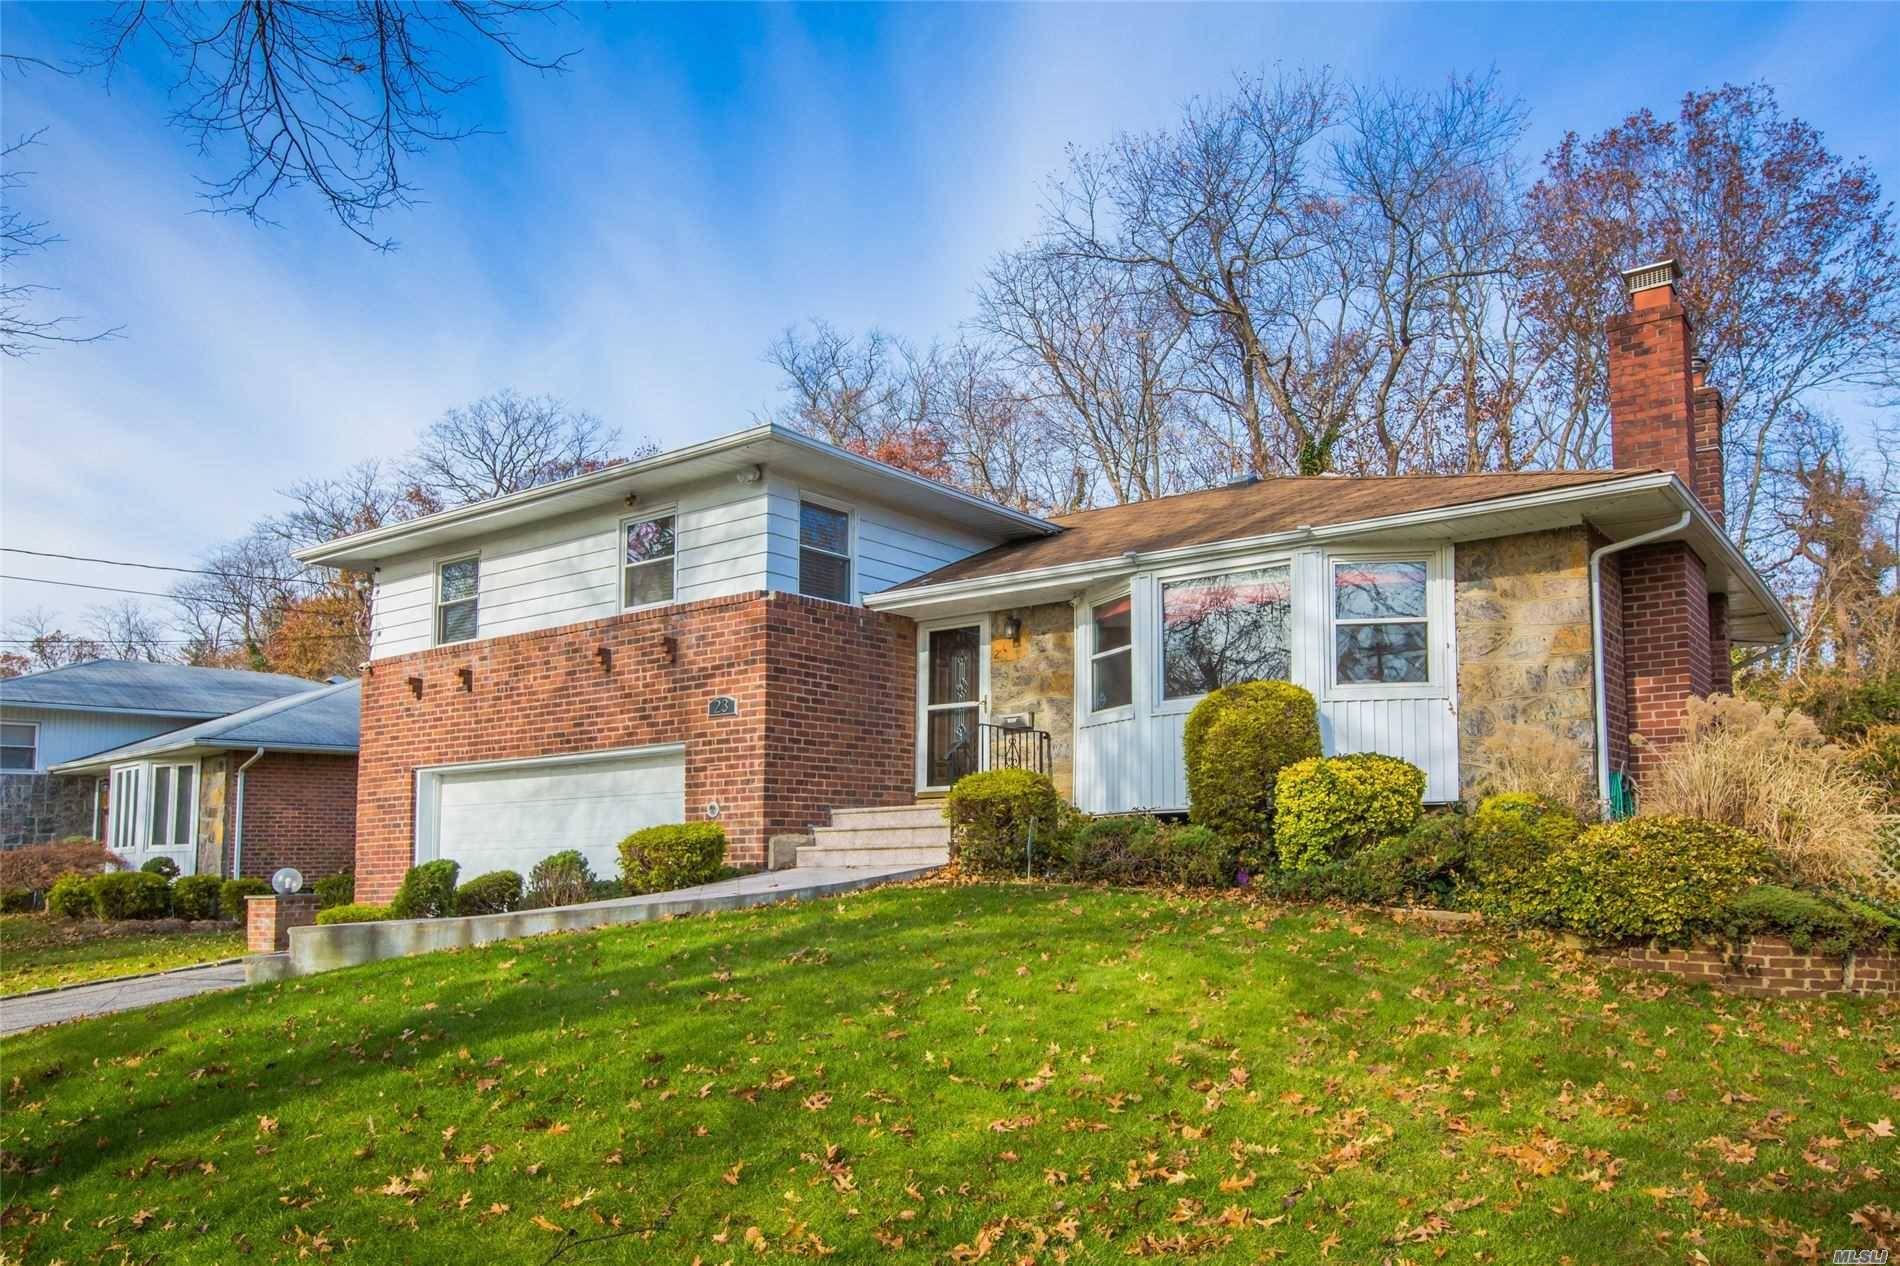 Gorgeous split four level brick home updated 5 yrs ago features three bed rooms 2.